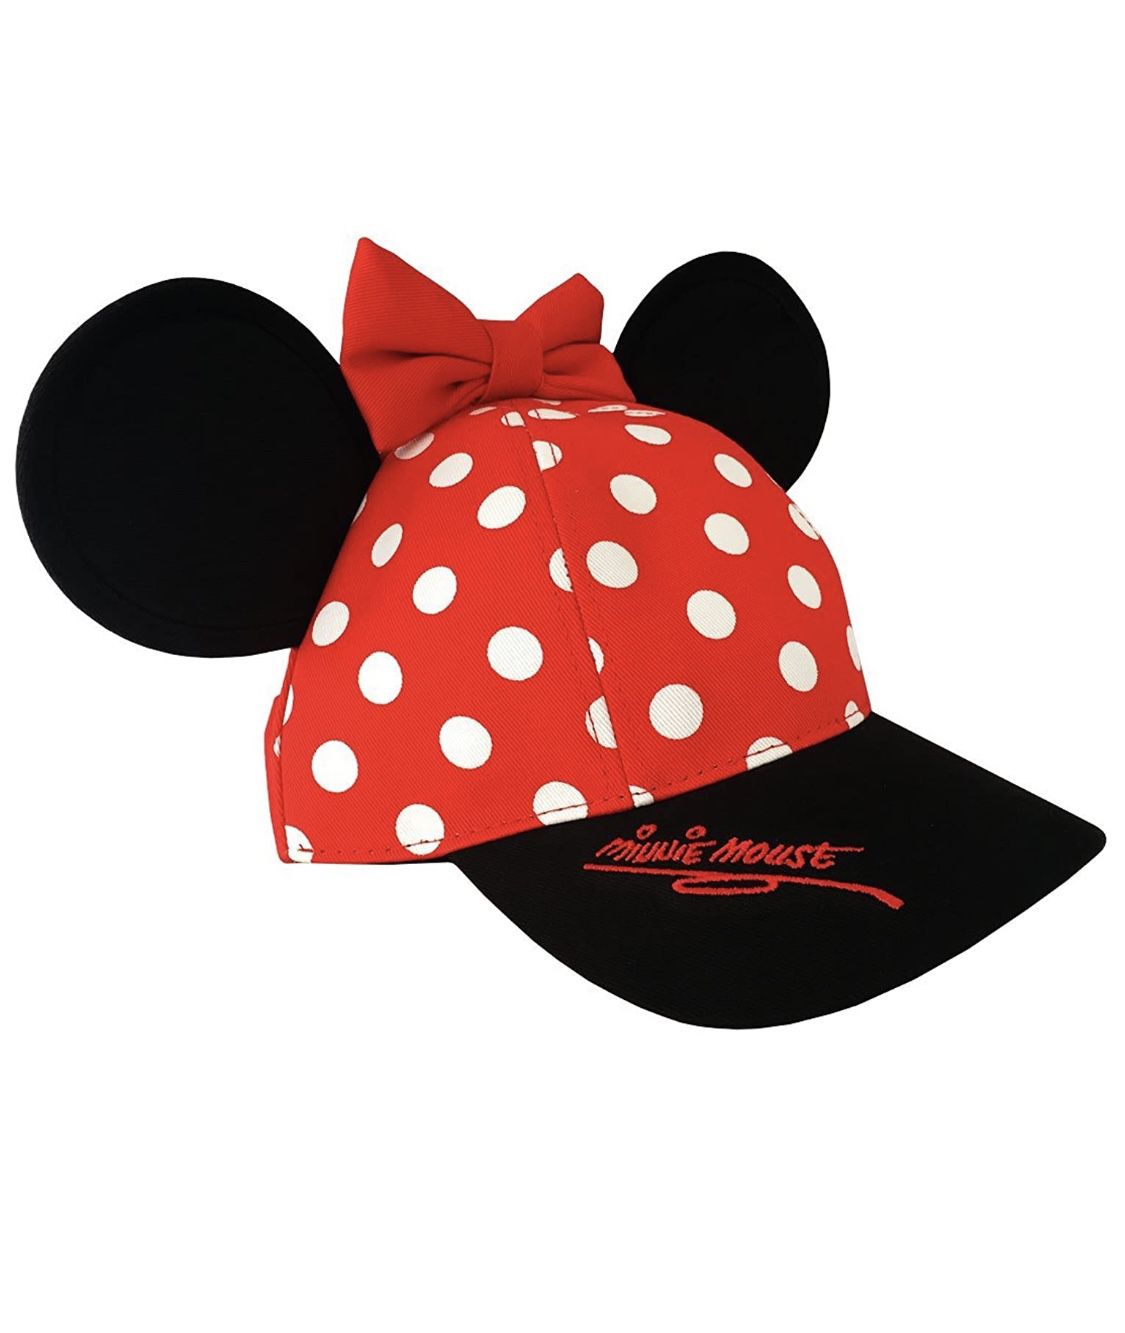 BRAND NEW MINNIE MOUSE HAT W/ TAGS